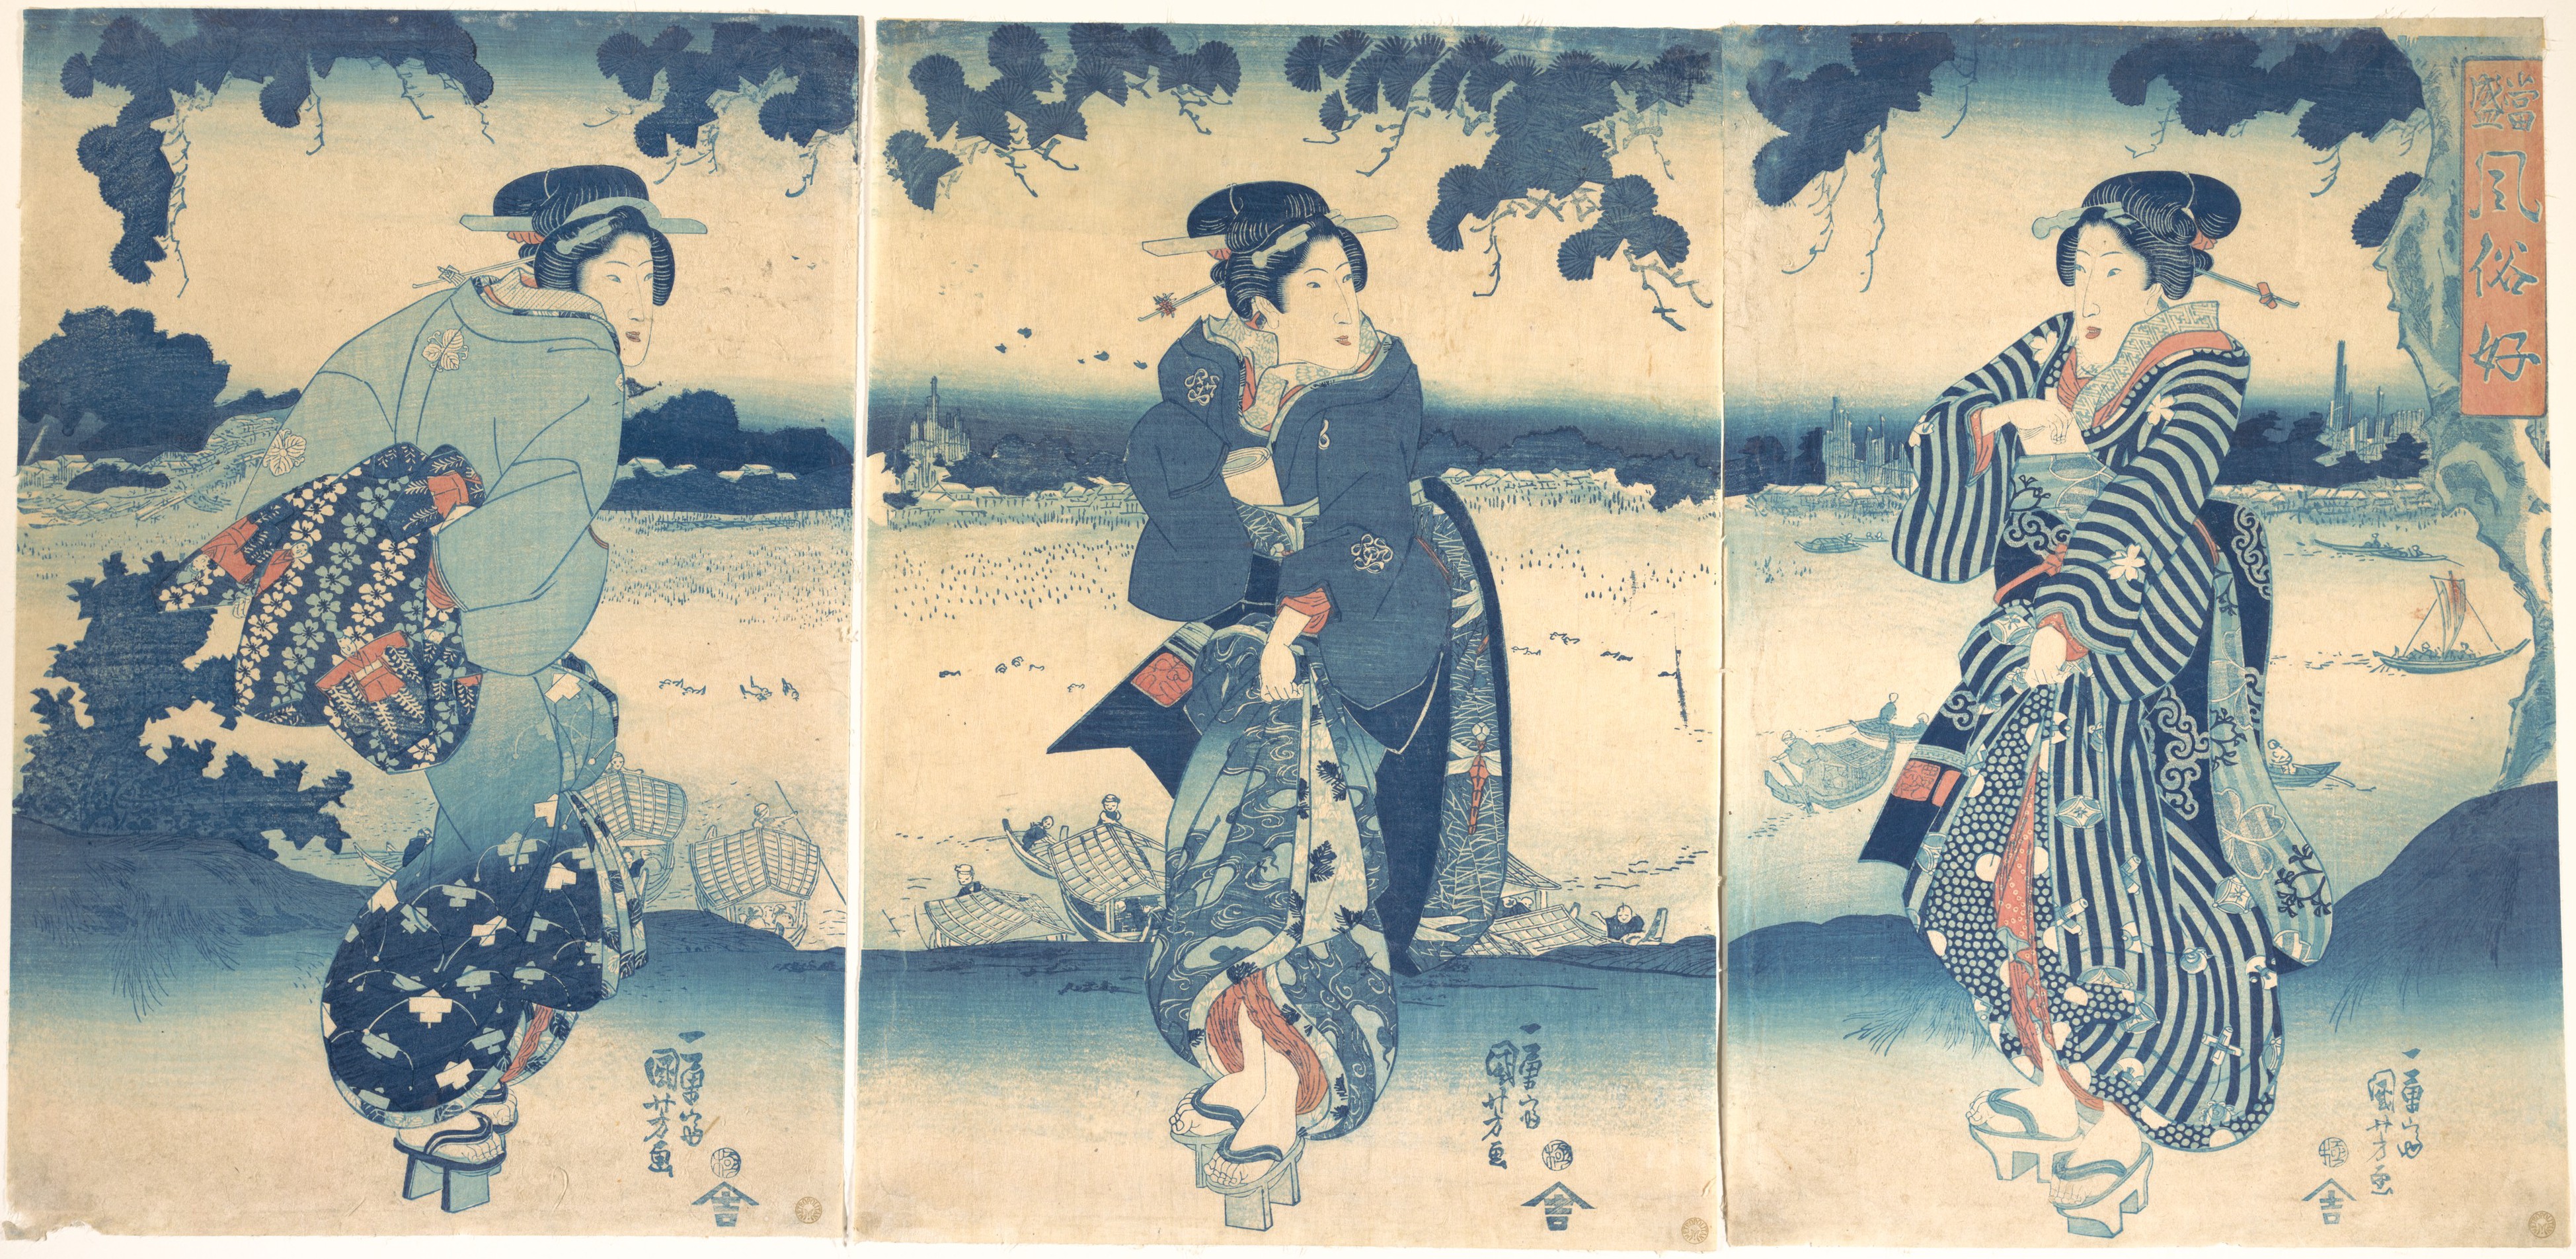 Lady About To Get Wet 22x30 Japanese Print Kunisada Asian Art Japan 